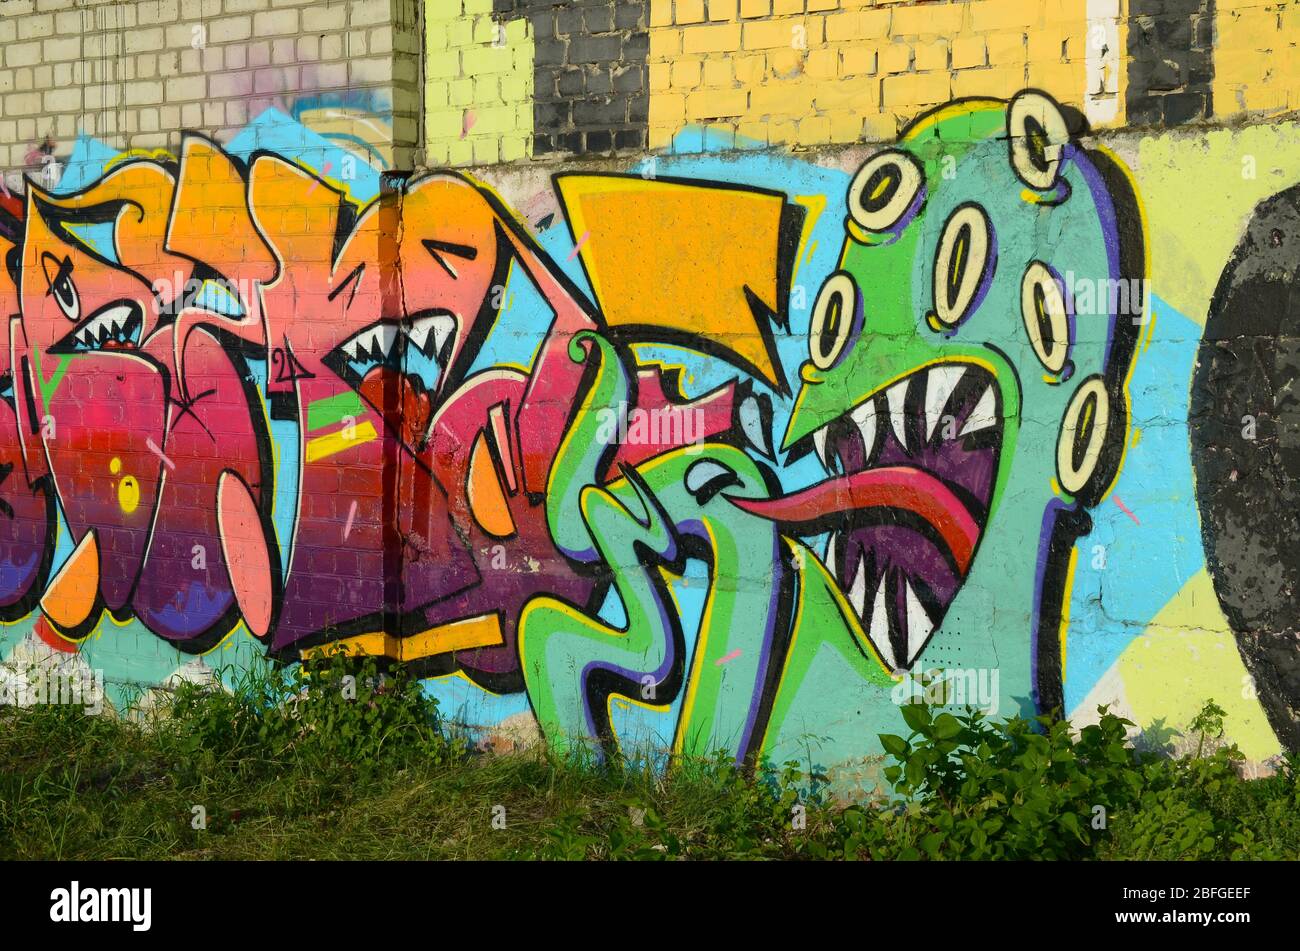 Abstract Colorful Fragment Of Graffiti Paintings On Old Brick Wall With Scary Octopus Face Street Art Composition With Parts Of Unwritten Letters And Stock Photo Alamy